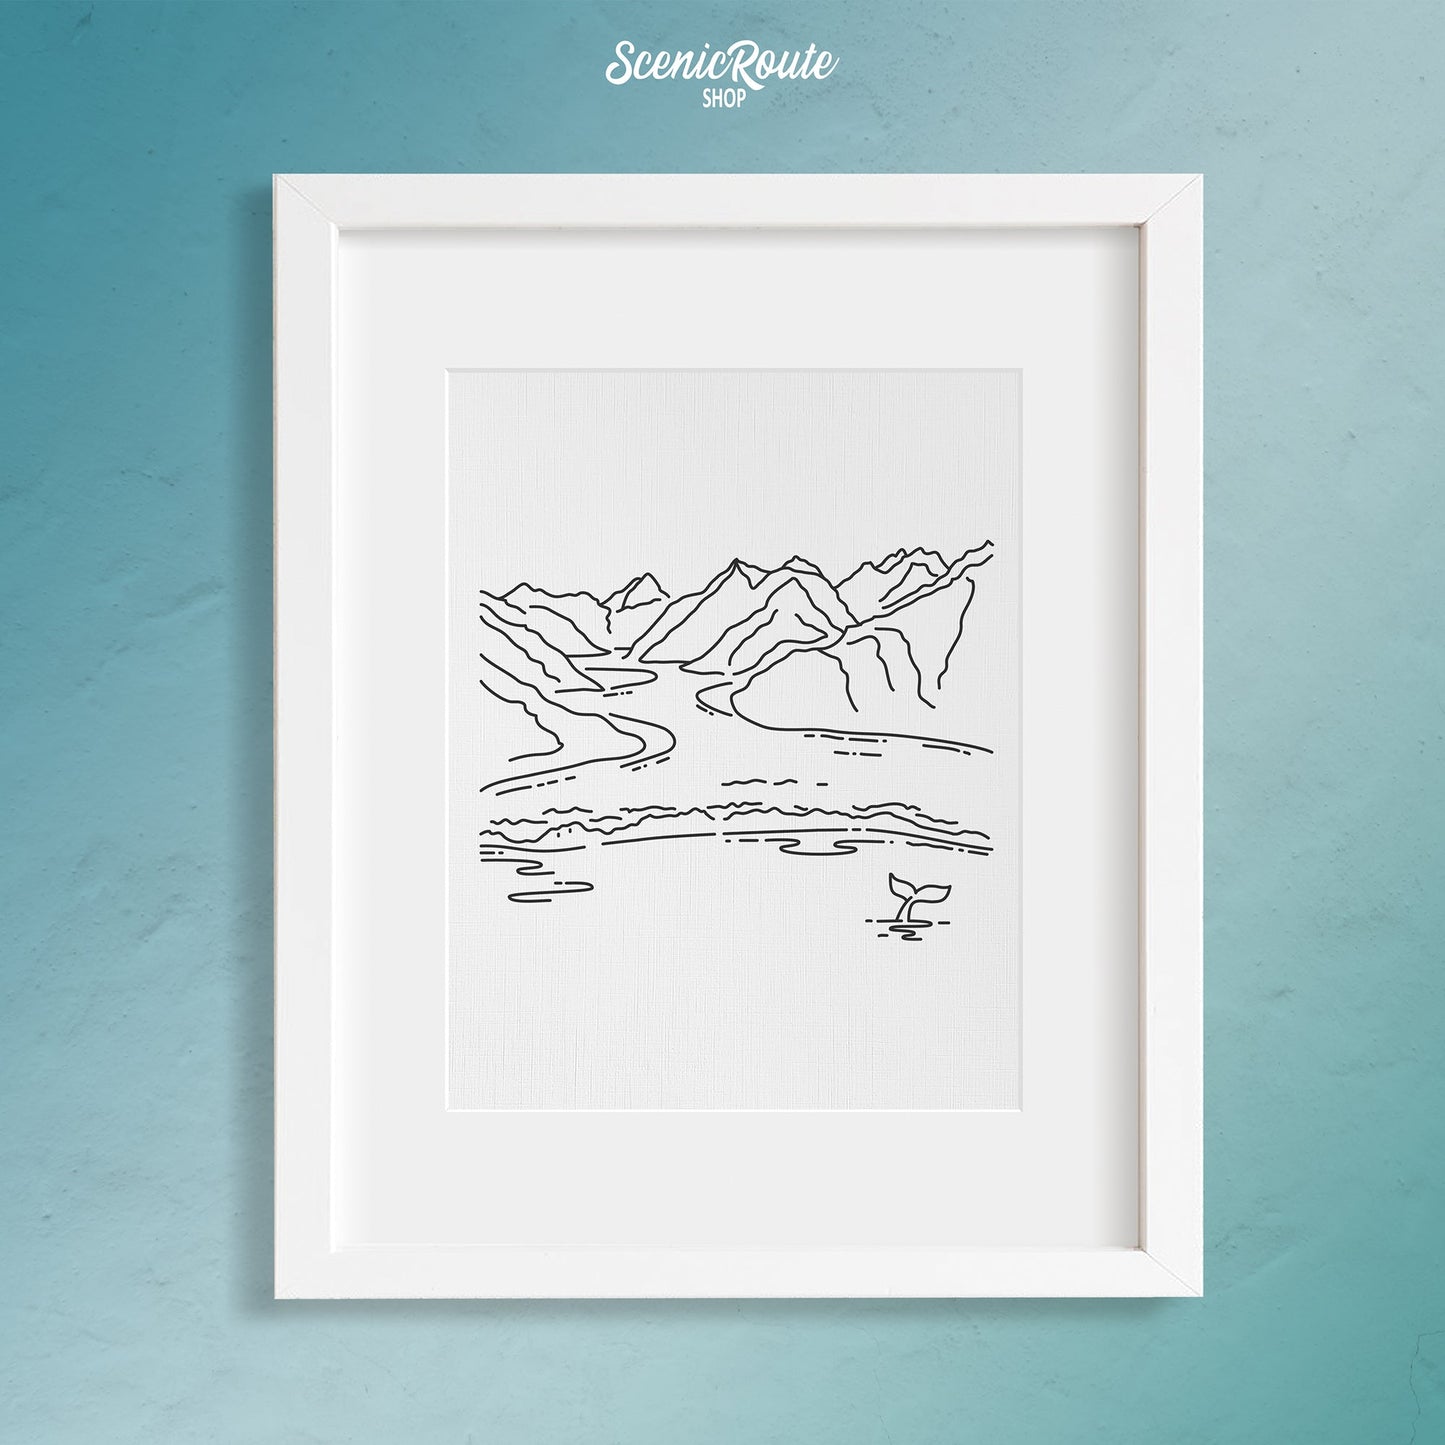 A framed line art drawing of Glacier Bay National Park on a blue wall